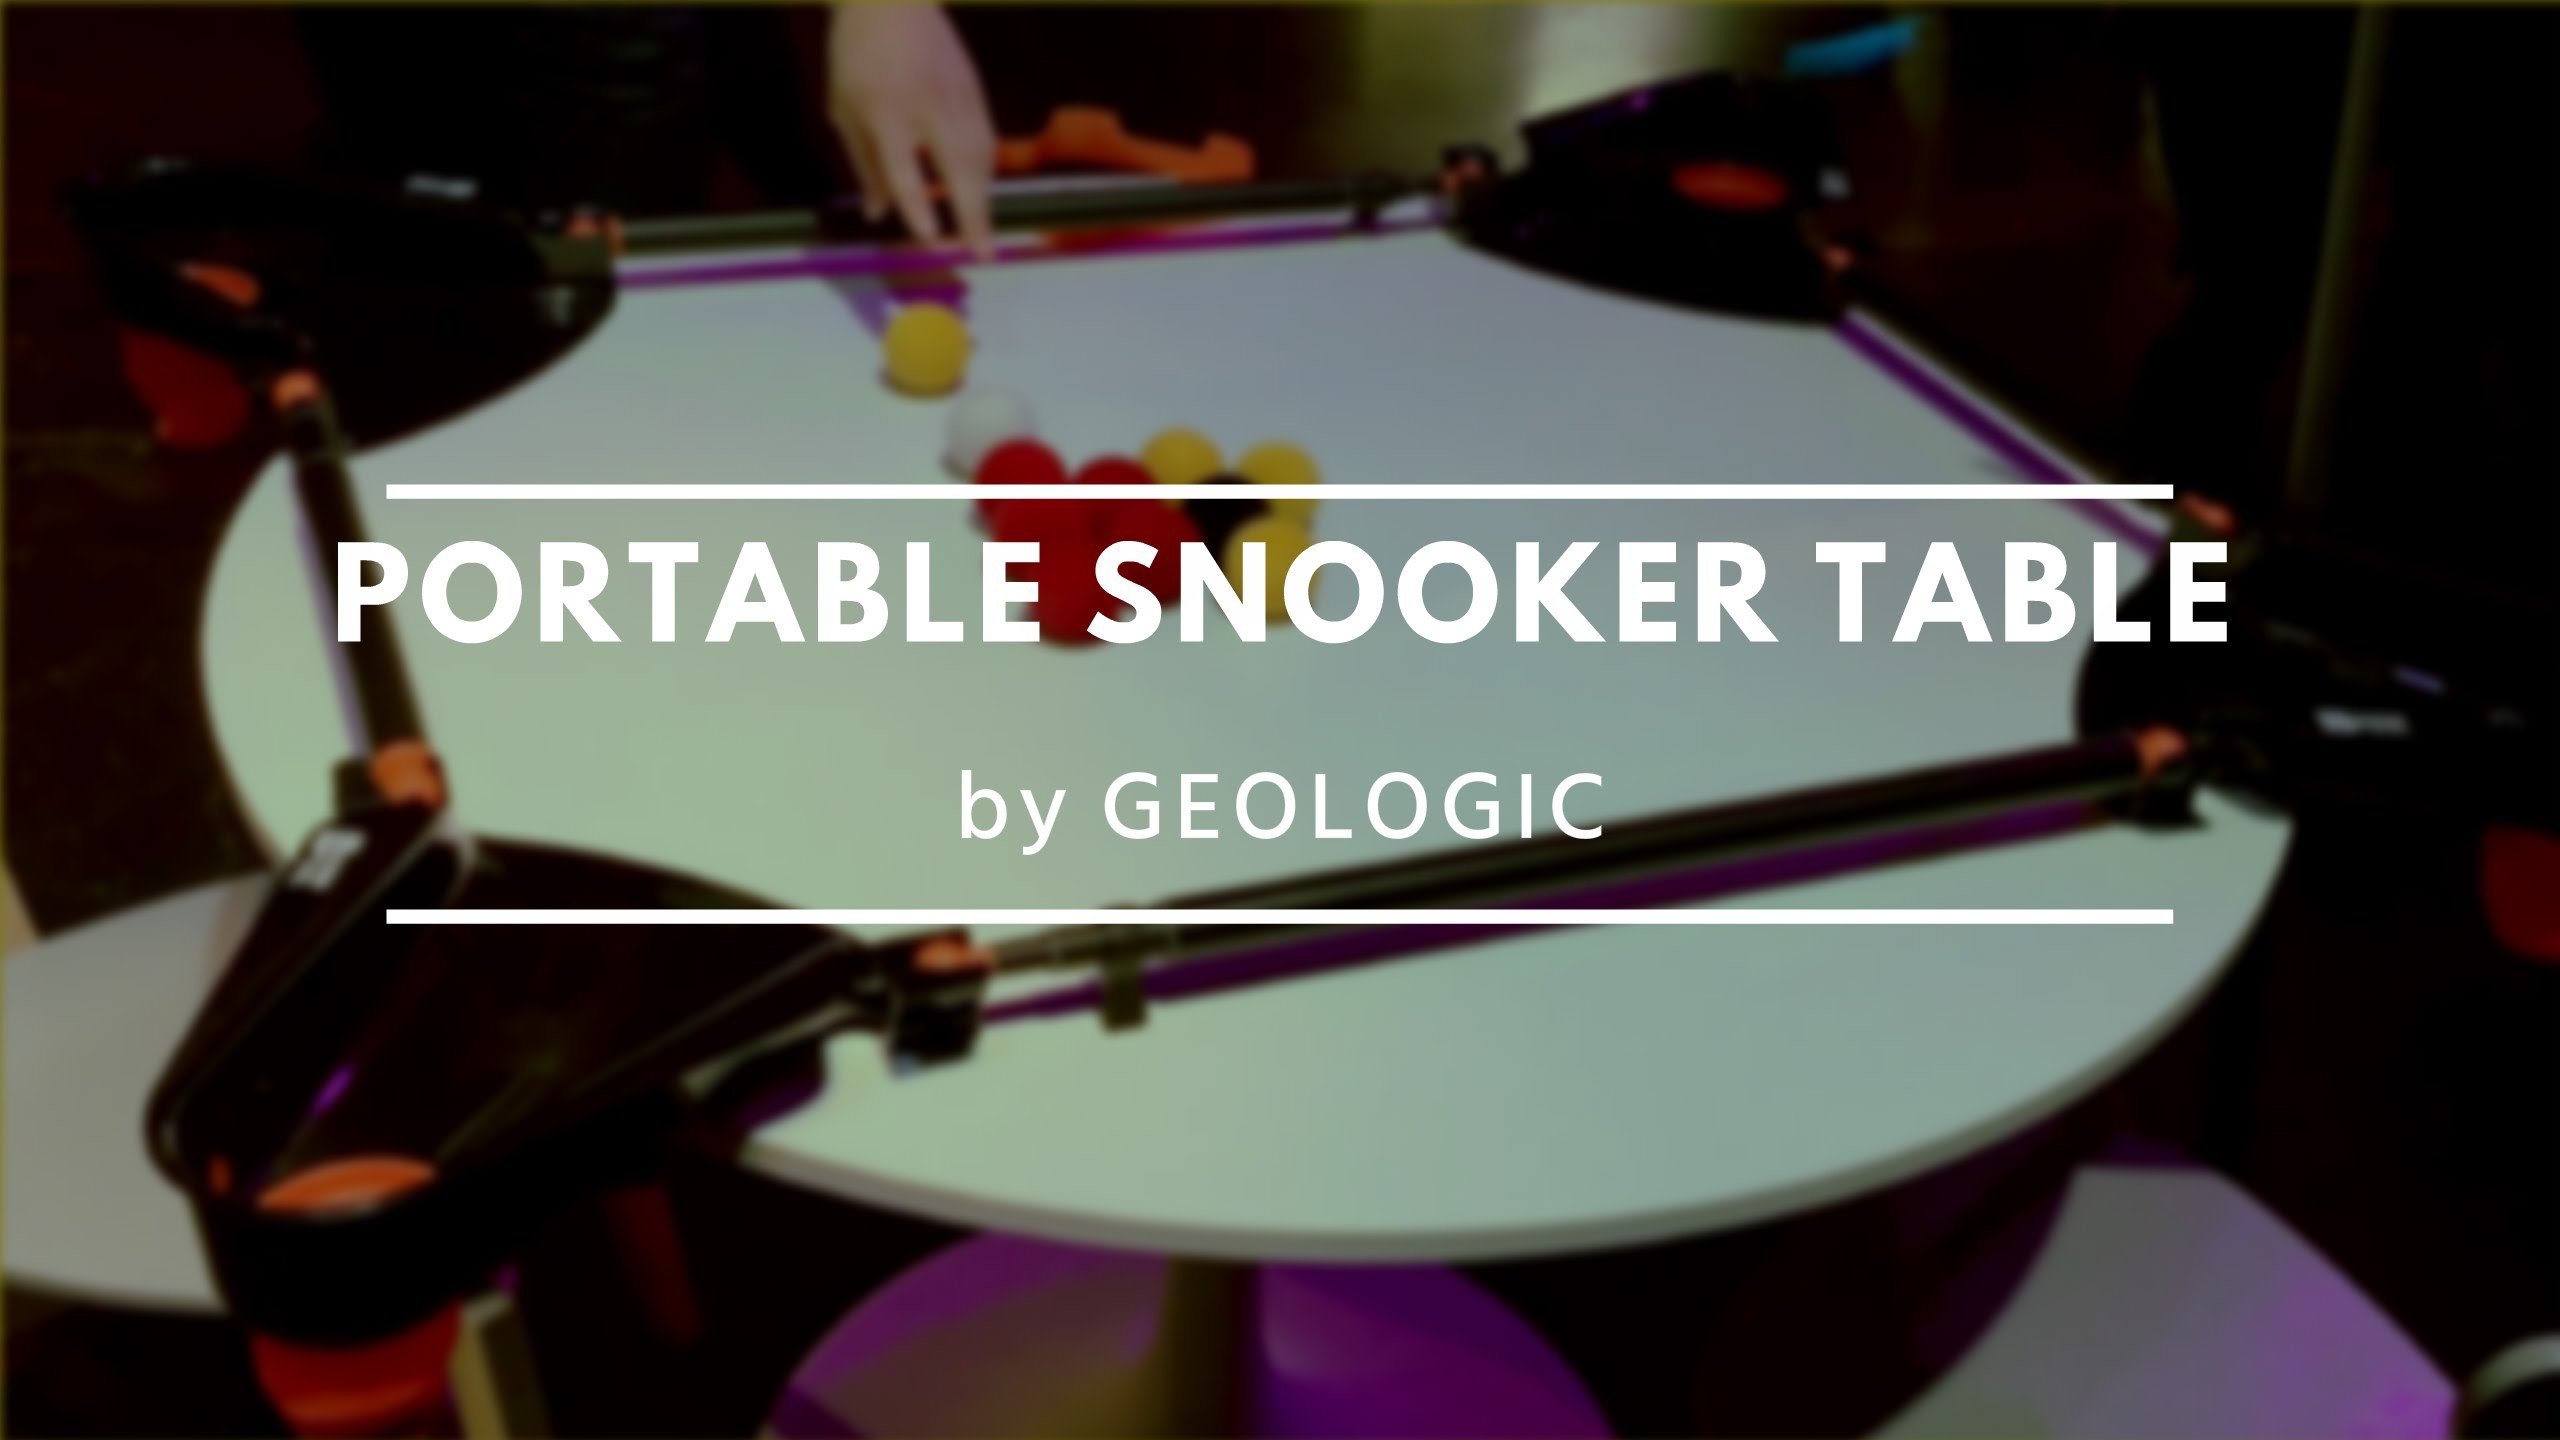 2560x1440 Portable Snooker Table by Geologic at the Decathlon Innovation Awards 2015  - YouTube